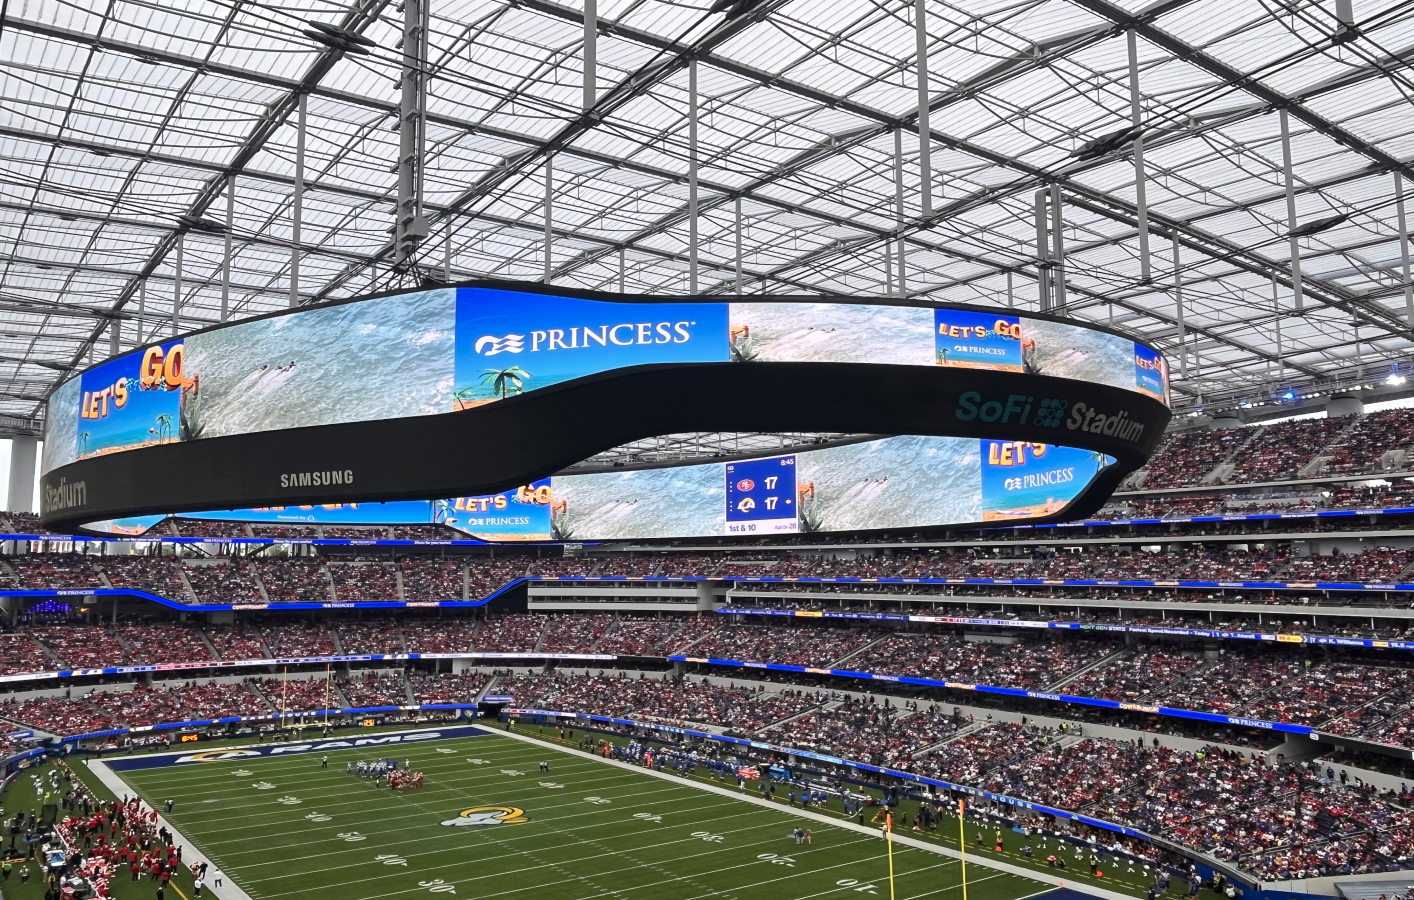 Disguise and Snapchat create an AR experience for Los Angeles Rams fans